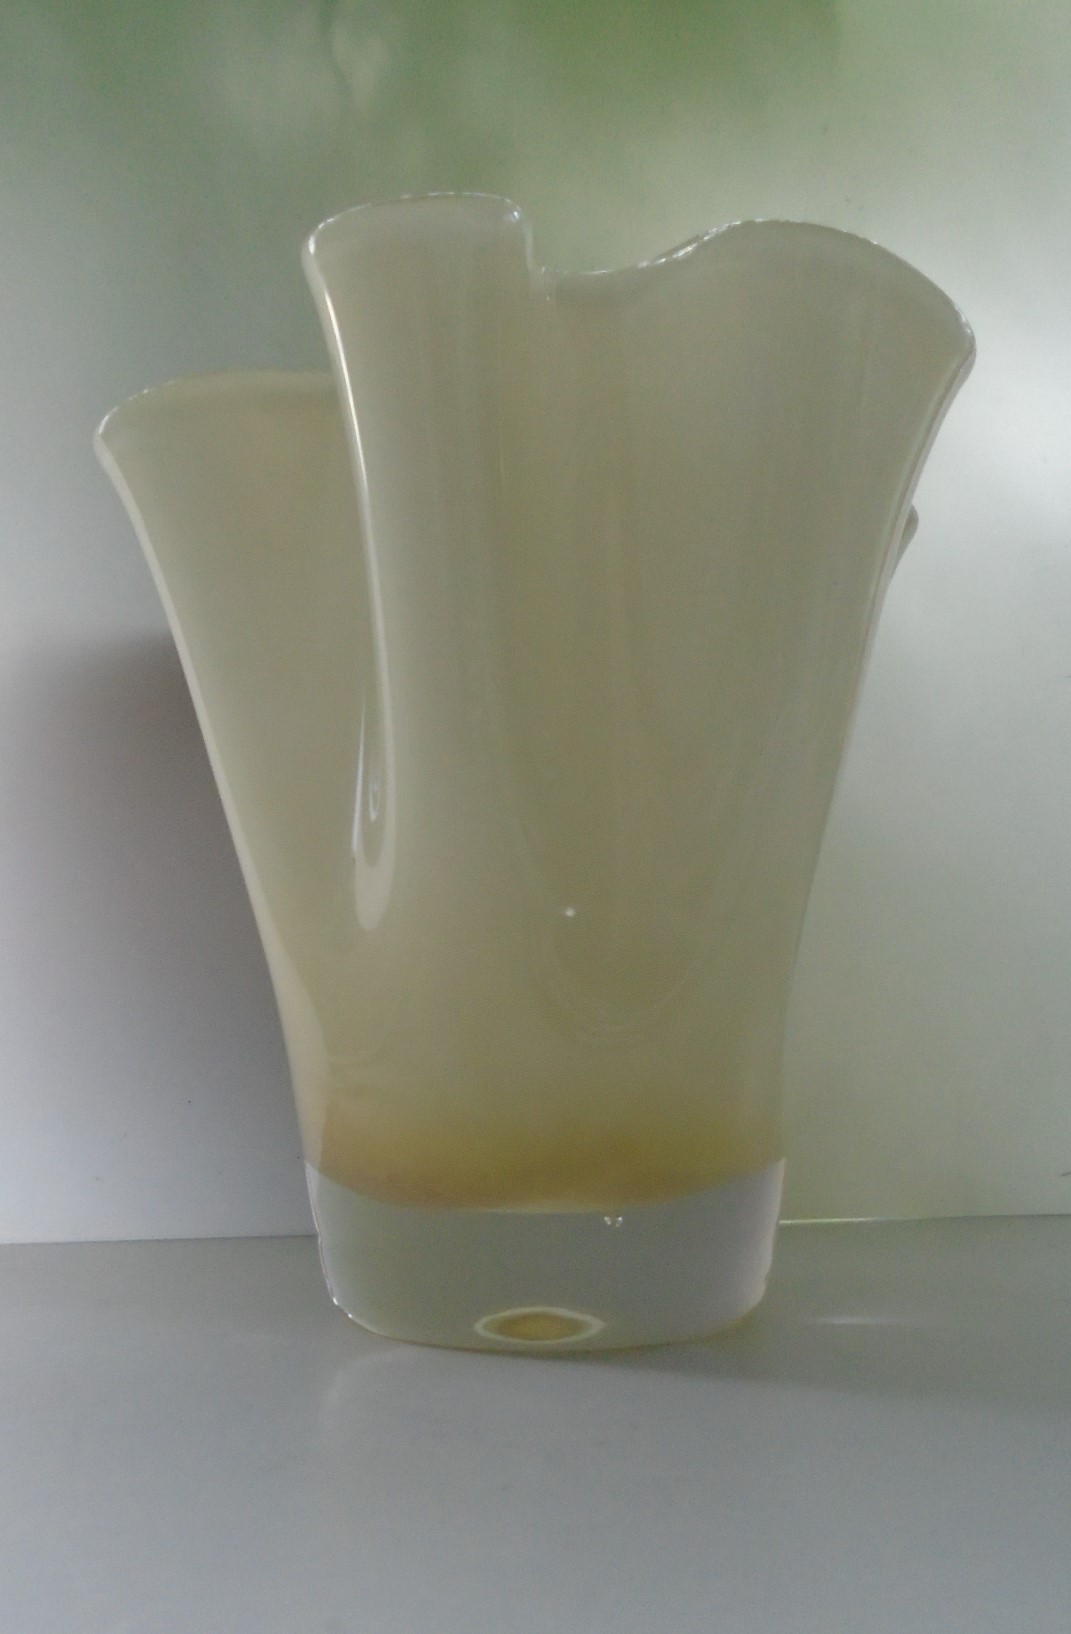  Exquisite cream coloured glass handkerchief vase, no makers mark but most likely from Polish Glass maker Krosno. 